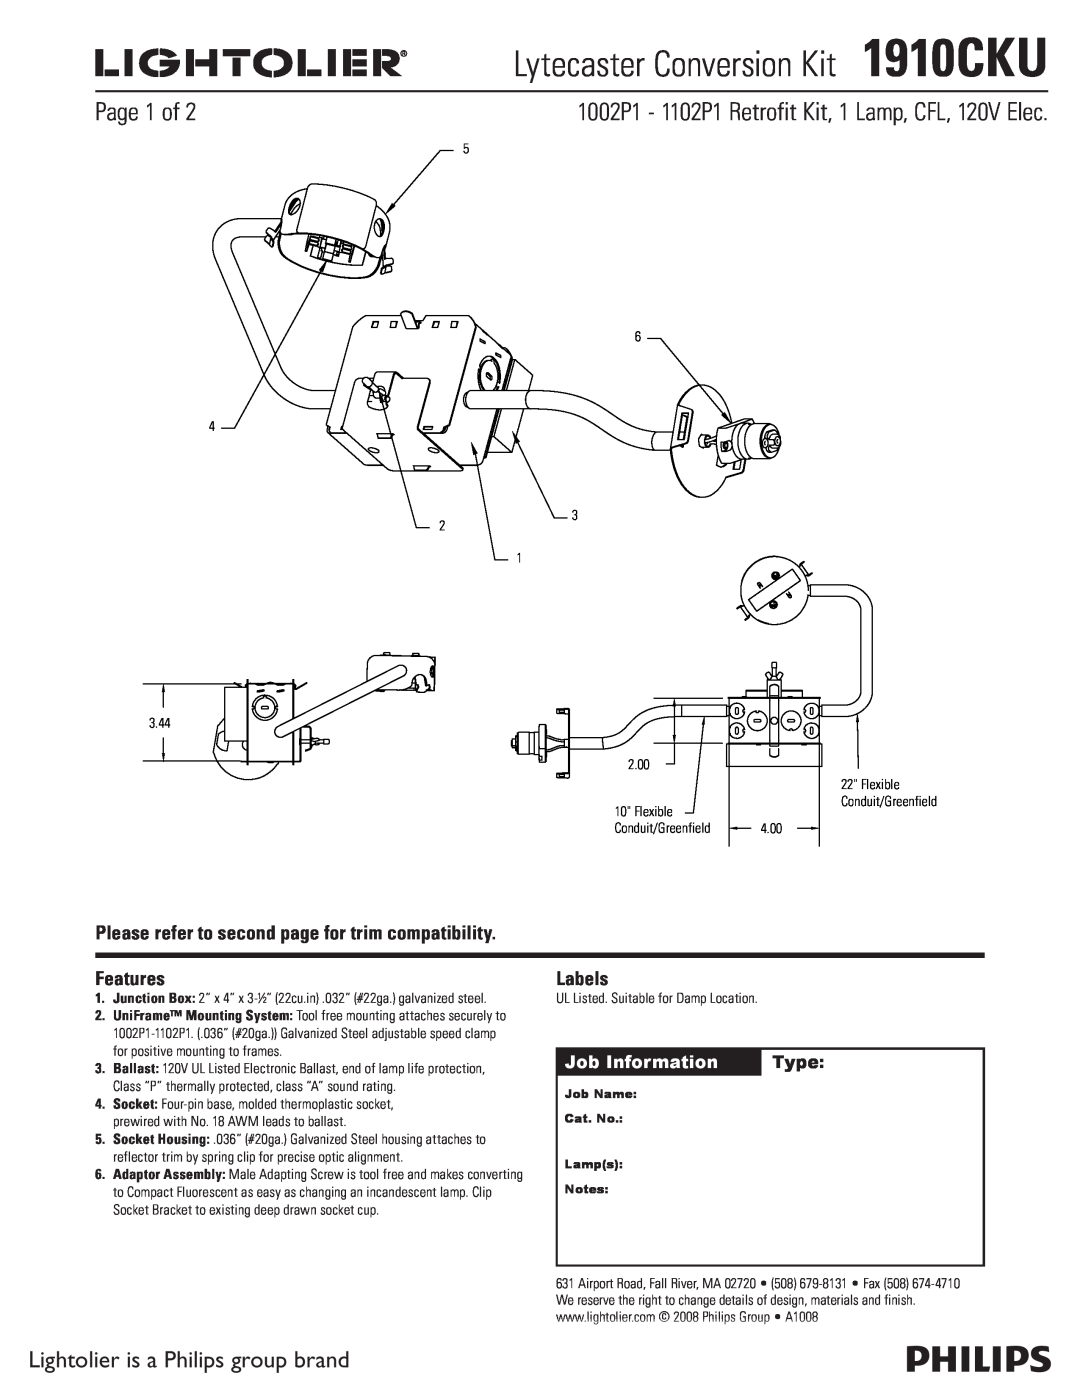 Lightolier manual Lytecaster Conversion Kit1910CKU, Page 1 of, Lightolier is a Philips group brand, Job Information 